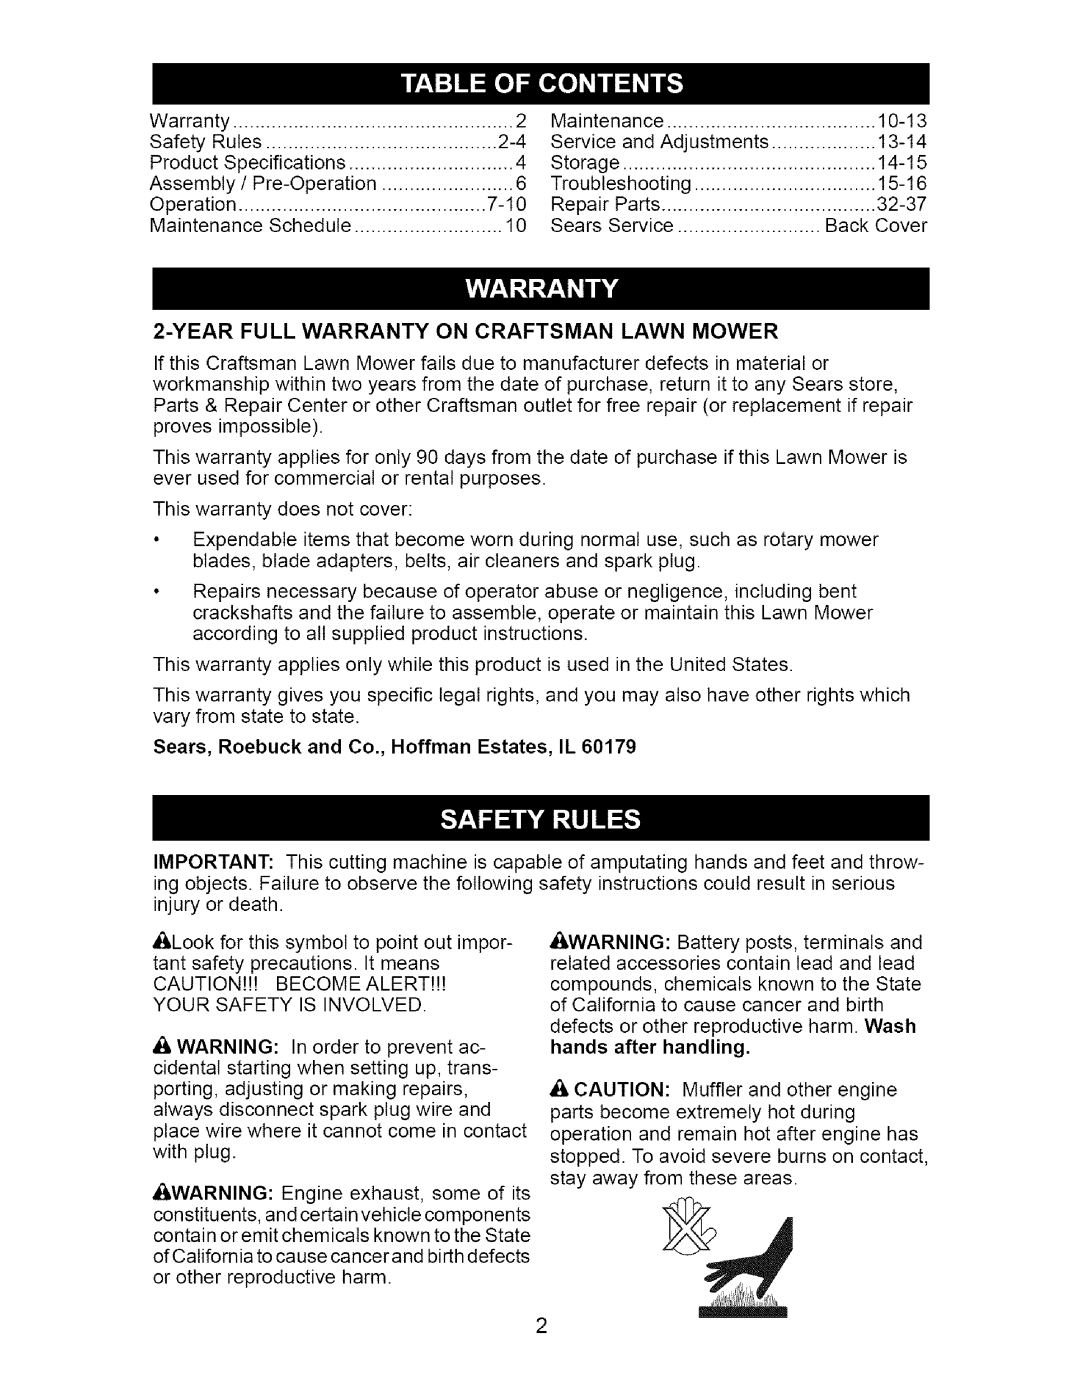 Craftsman 917.385124 owner manual Yearfull Warranty On Craftsman Lawn Mower, Sears, Roebuck and Co., Hoffman Estates, IL 